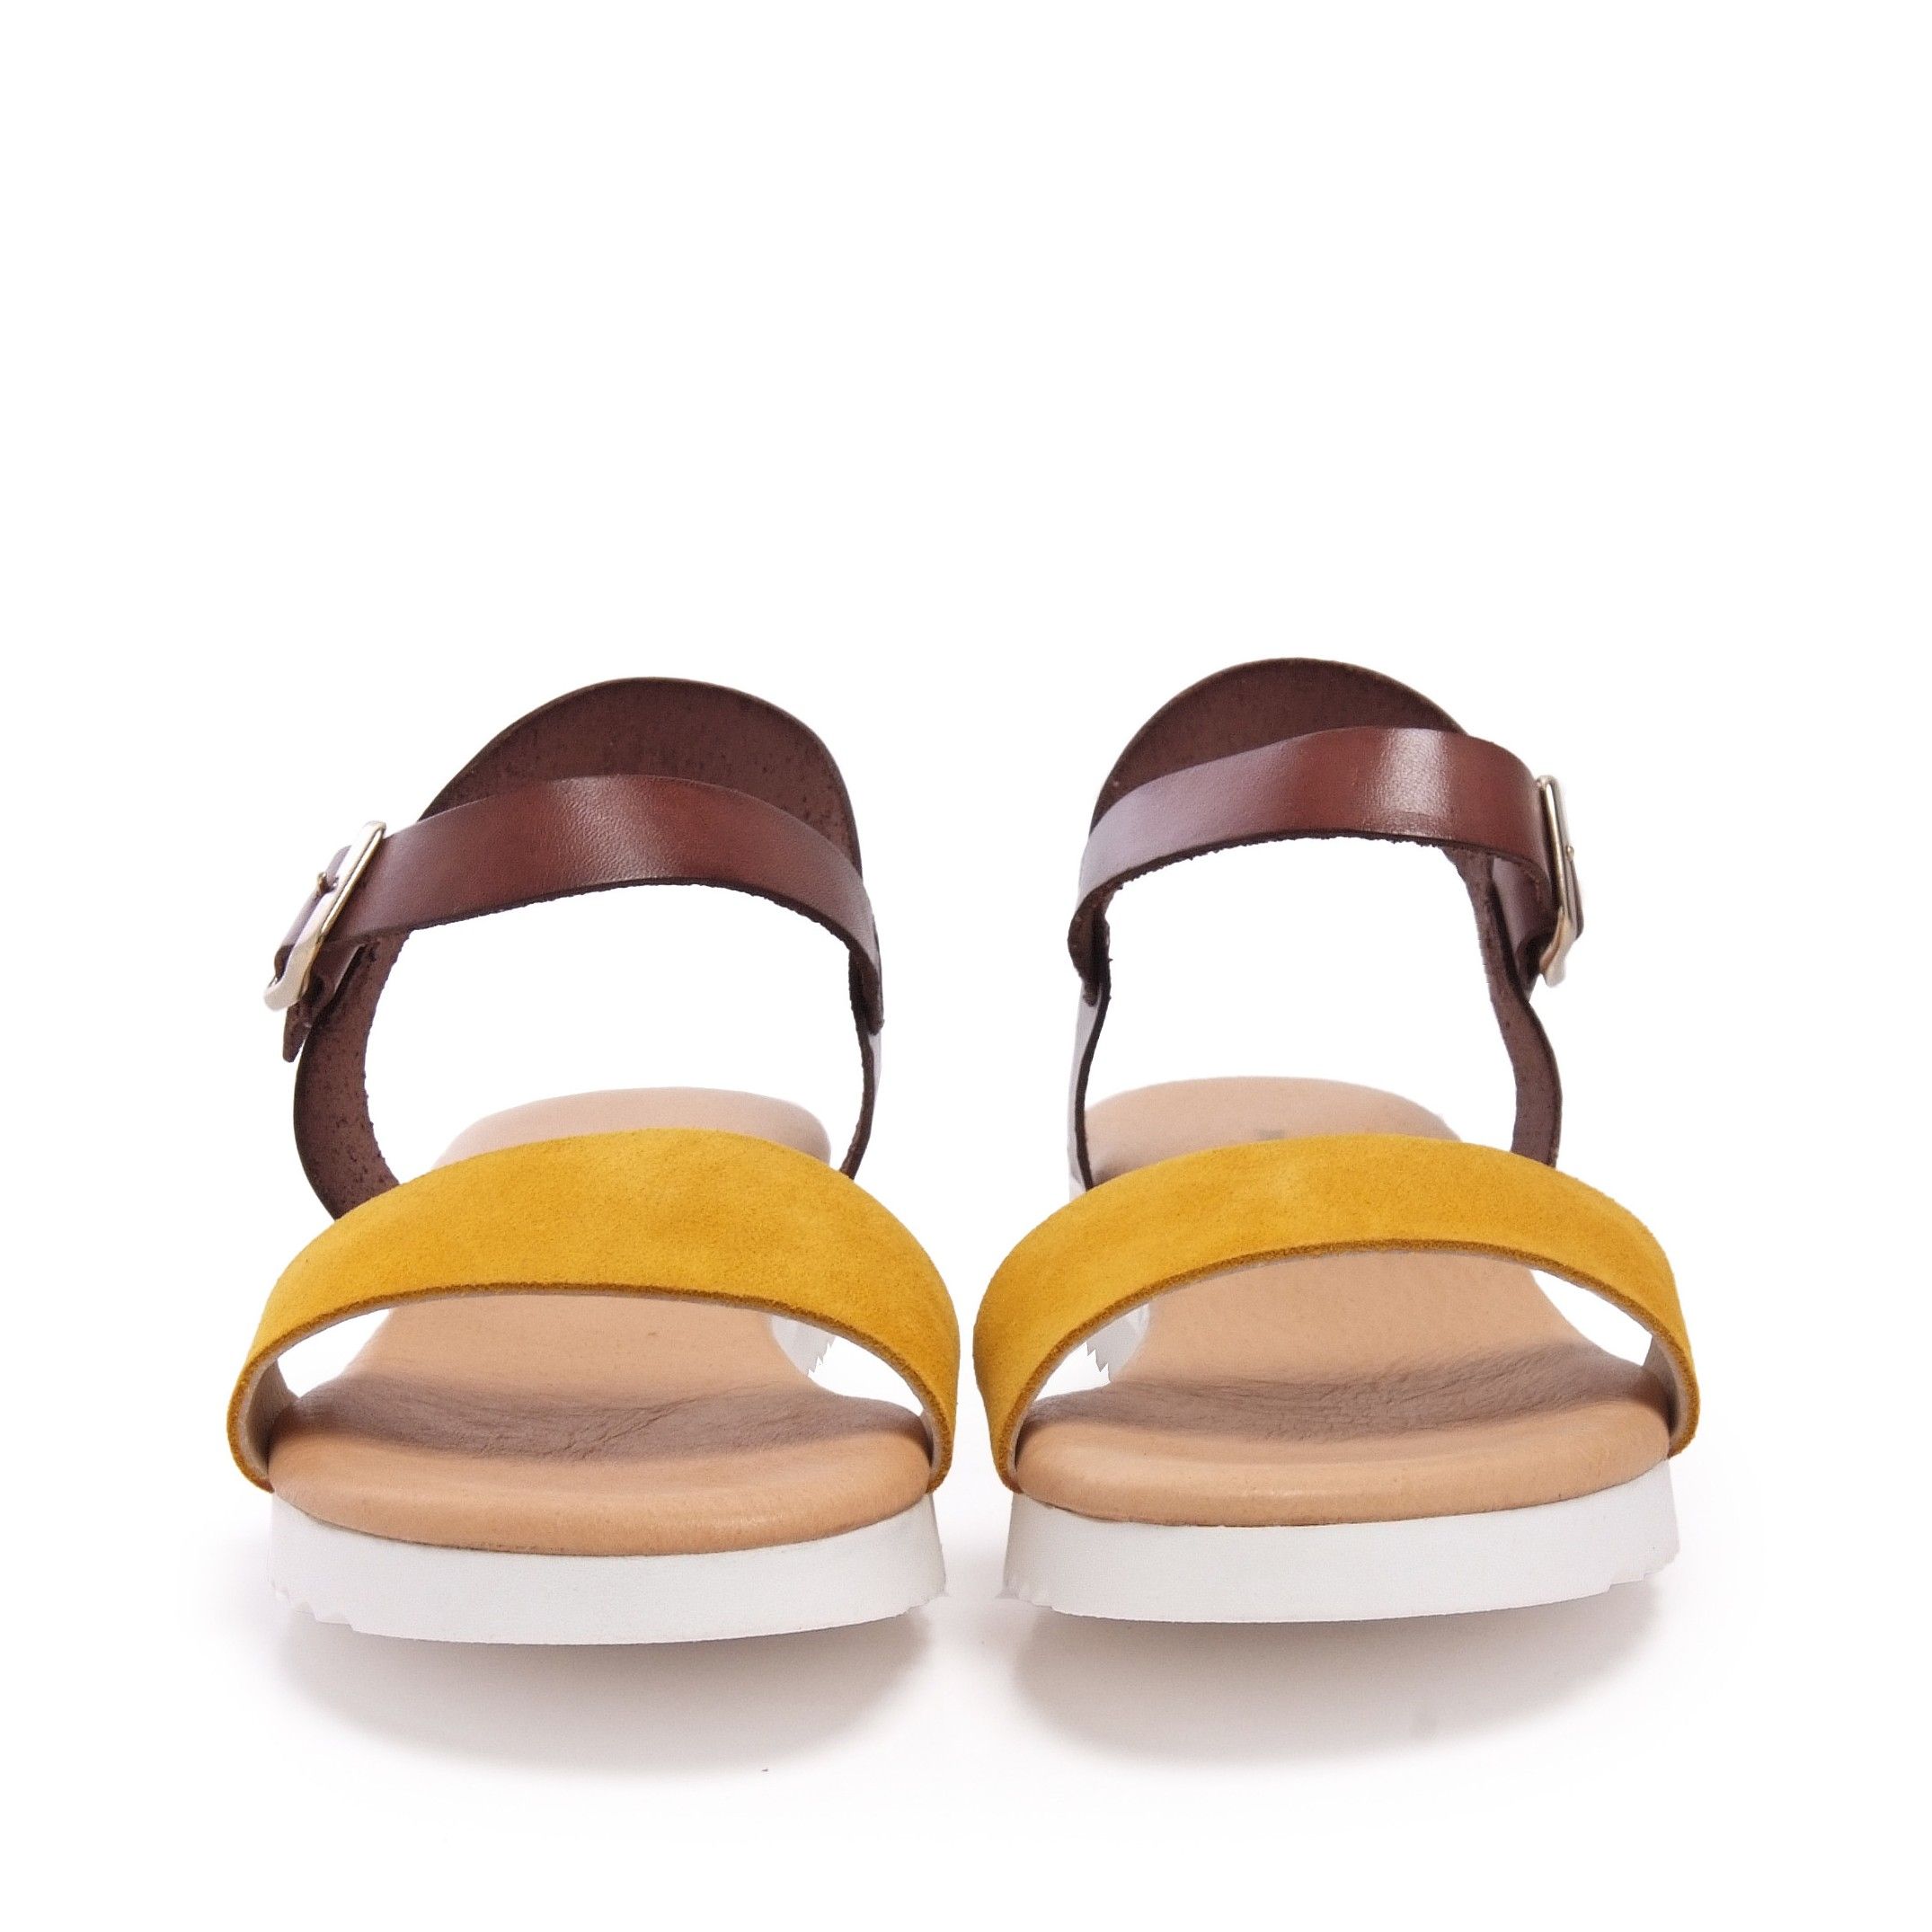 Leather flat sandal with two wide strips. Closure: adjustable metal buckle. Upper: lether. Inner: tissue. Insole: leather. Wedge: 2,5 cm. Platform: 1 cm. Sole: Non-skid TR. MADE IN SPAIN.